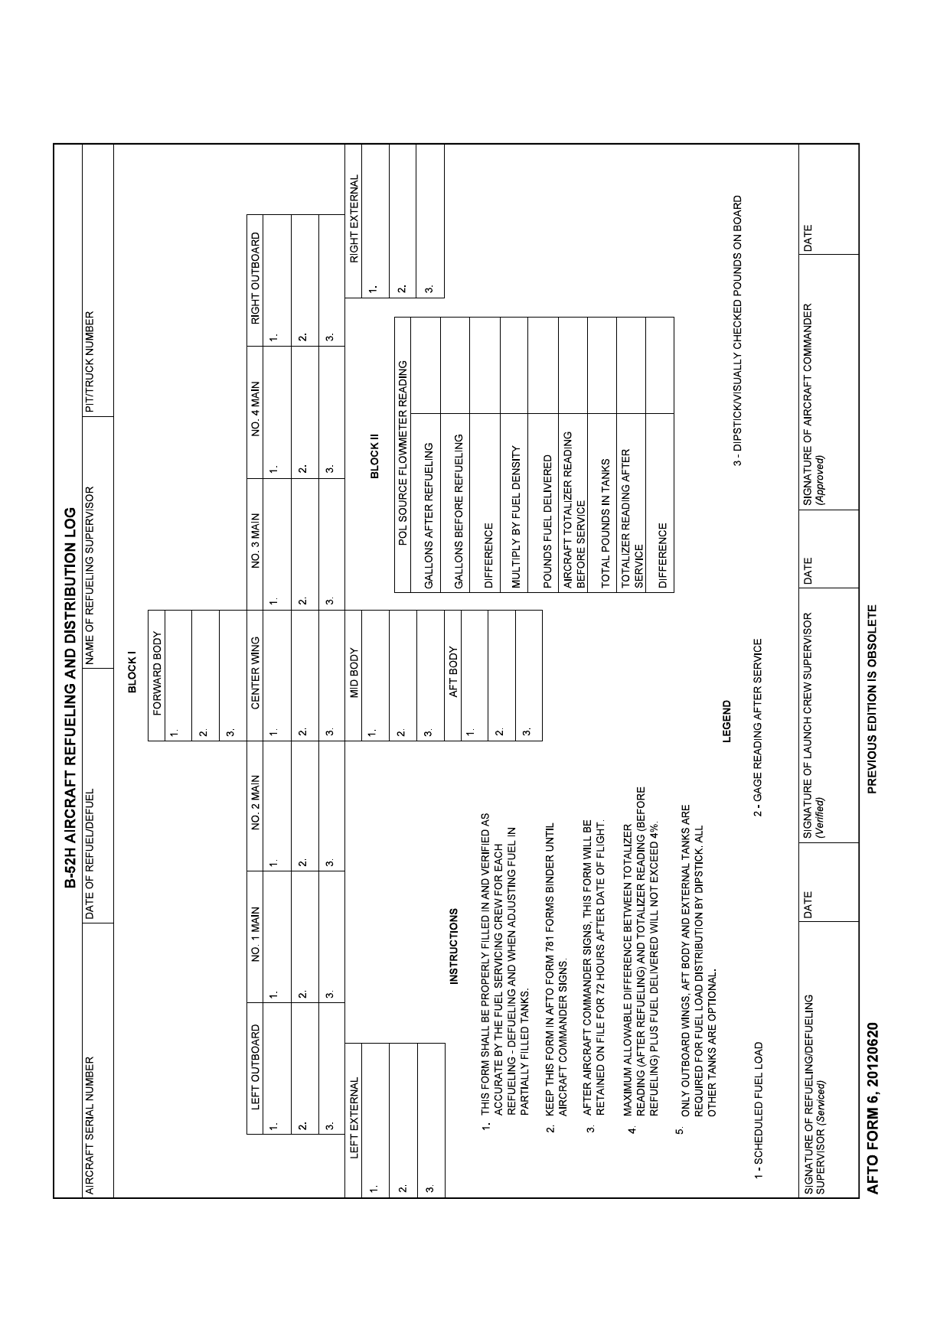 AFTO Form 6 B-52h Aircraft Refueling and Defueling Log, Page 1